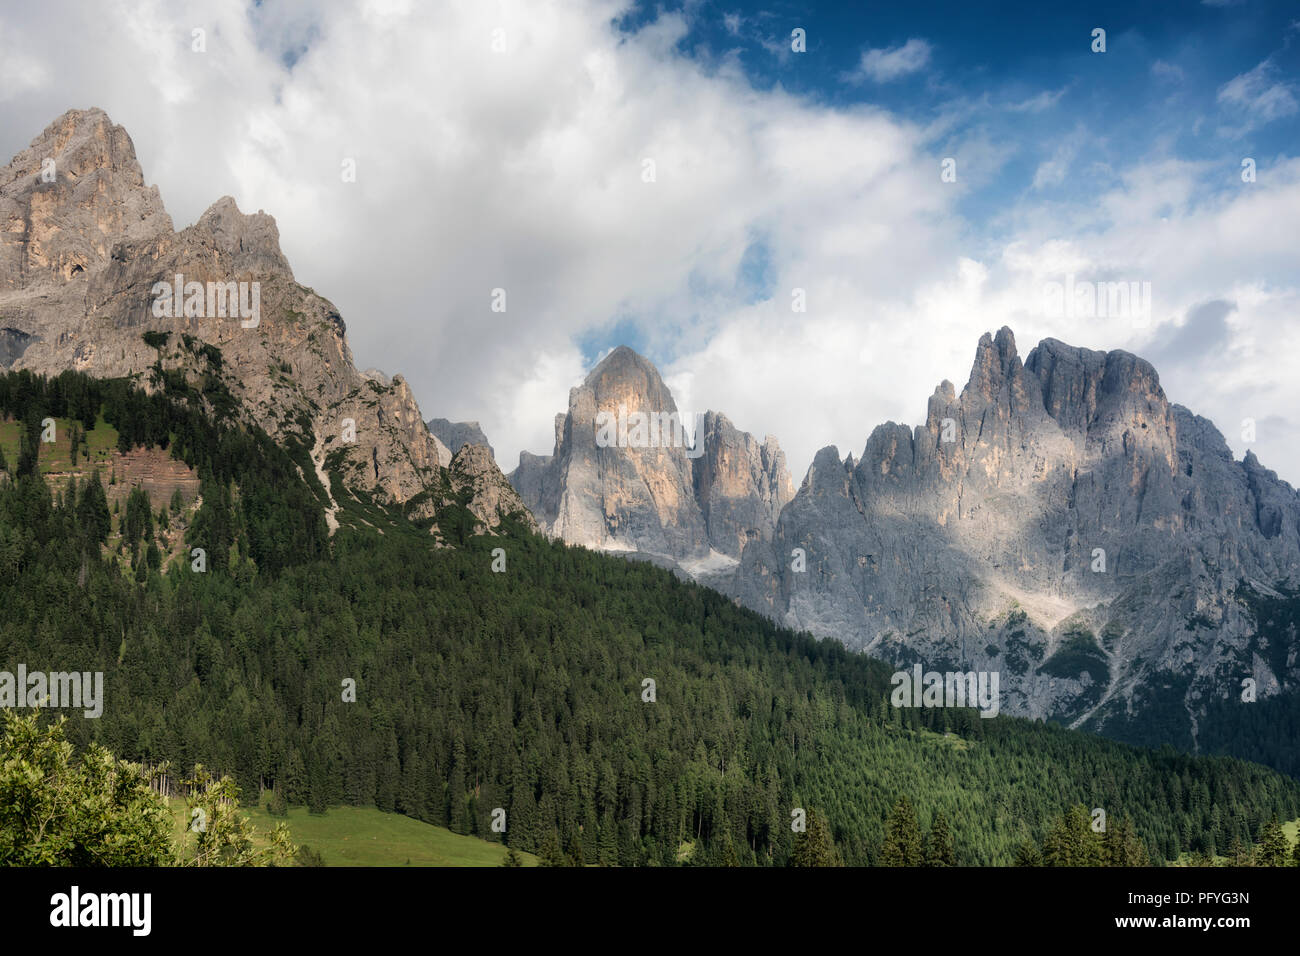 The Pale of San Martino group view from San Martino di Castrozza. Summer in the Dolomites. Italy Stock Photo